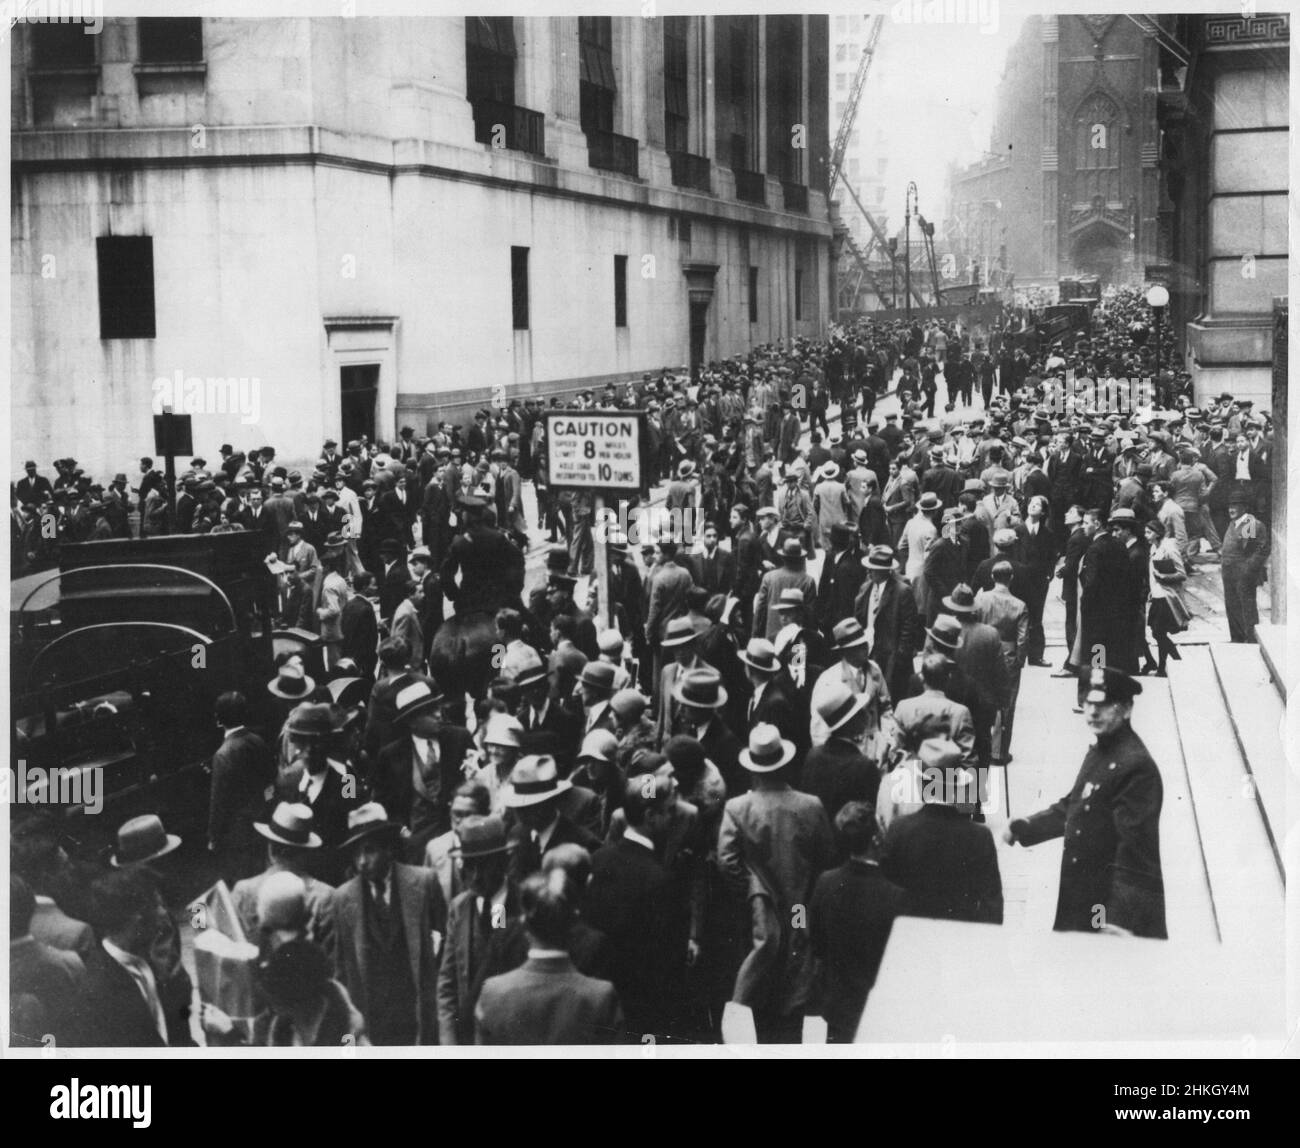 Wall Street in panic due to heavy trading on Black Tuesday, New York City, October 29, 1929. Stock Photo